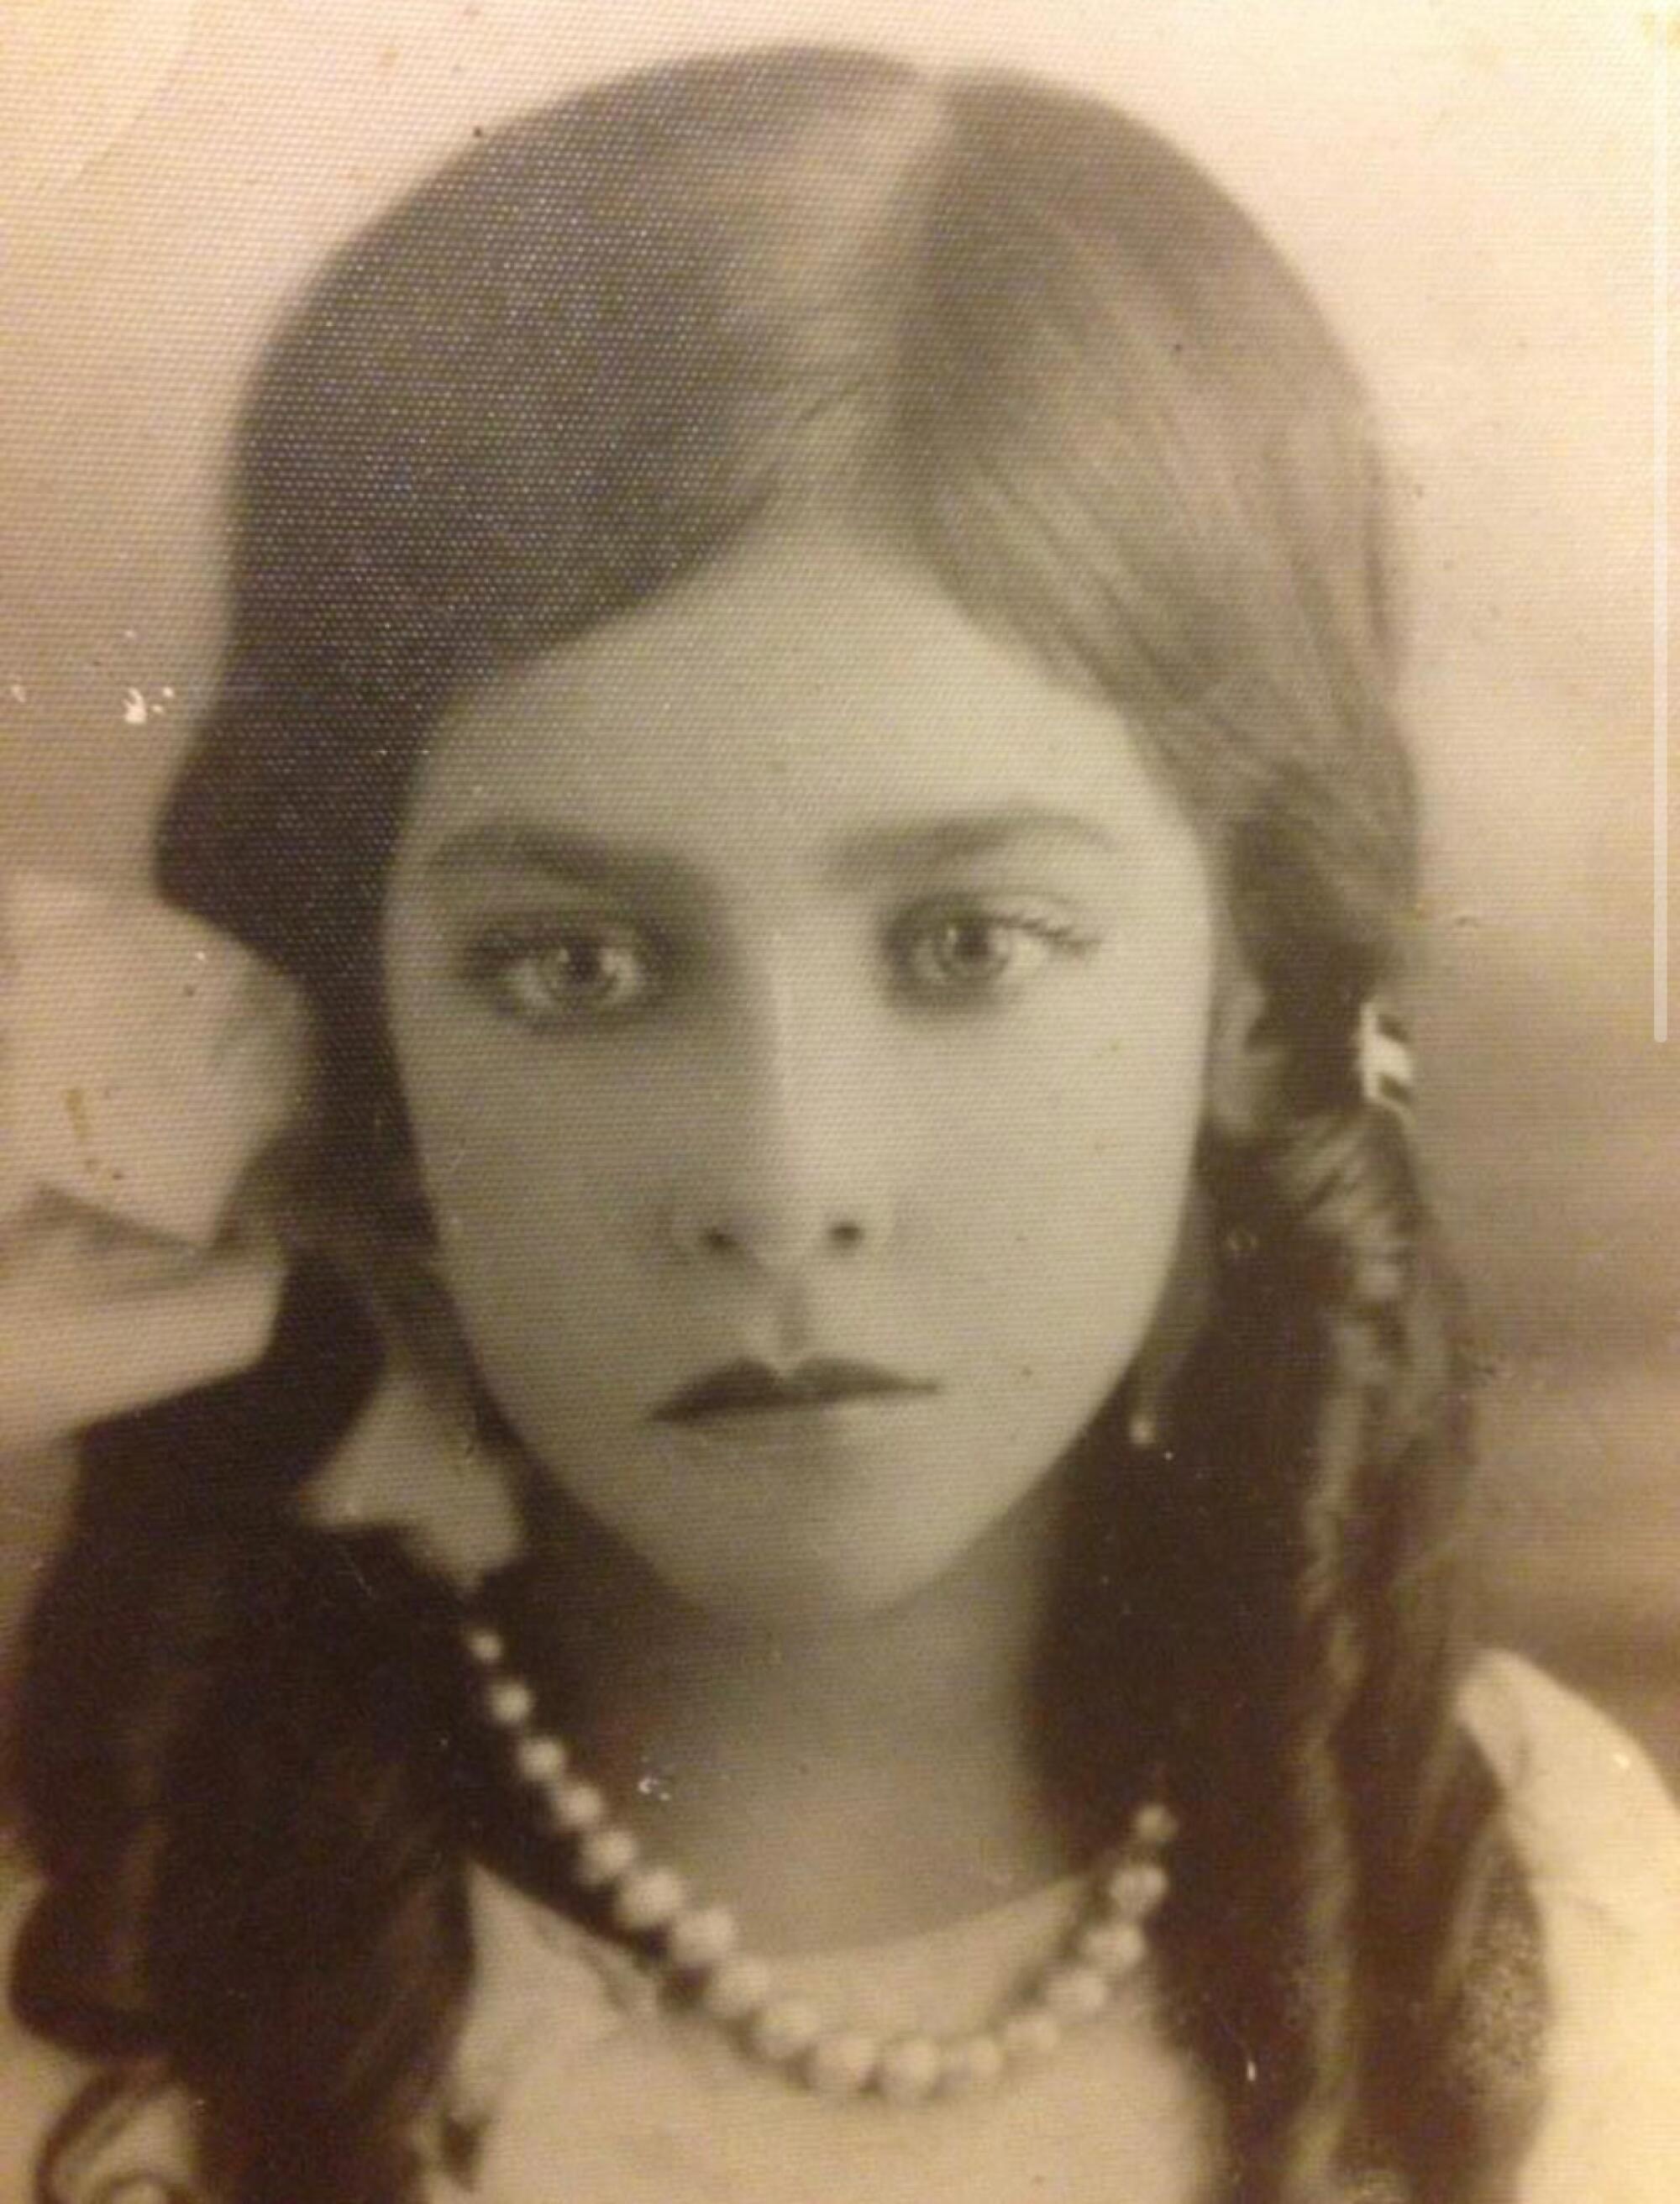 Maria Diaz when she was a youth in Mexico.